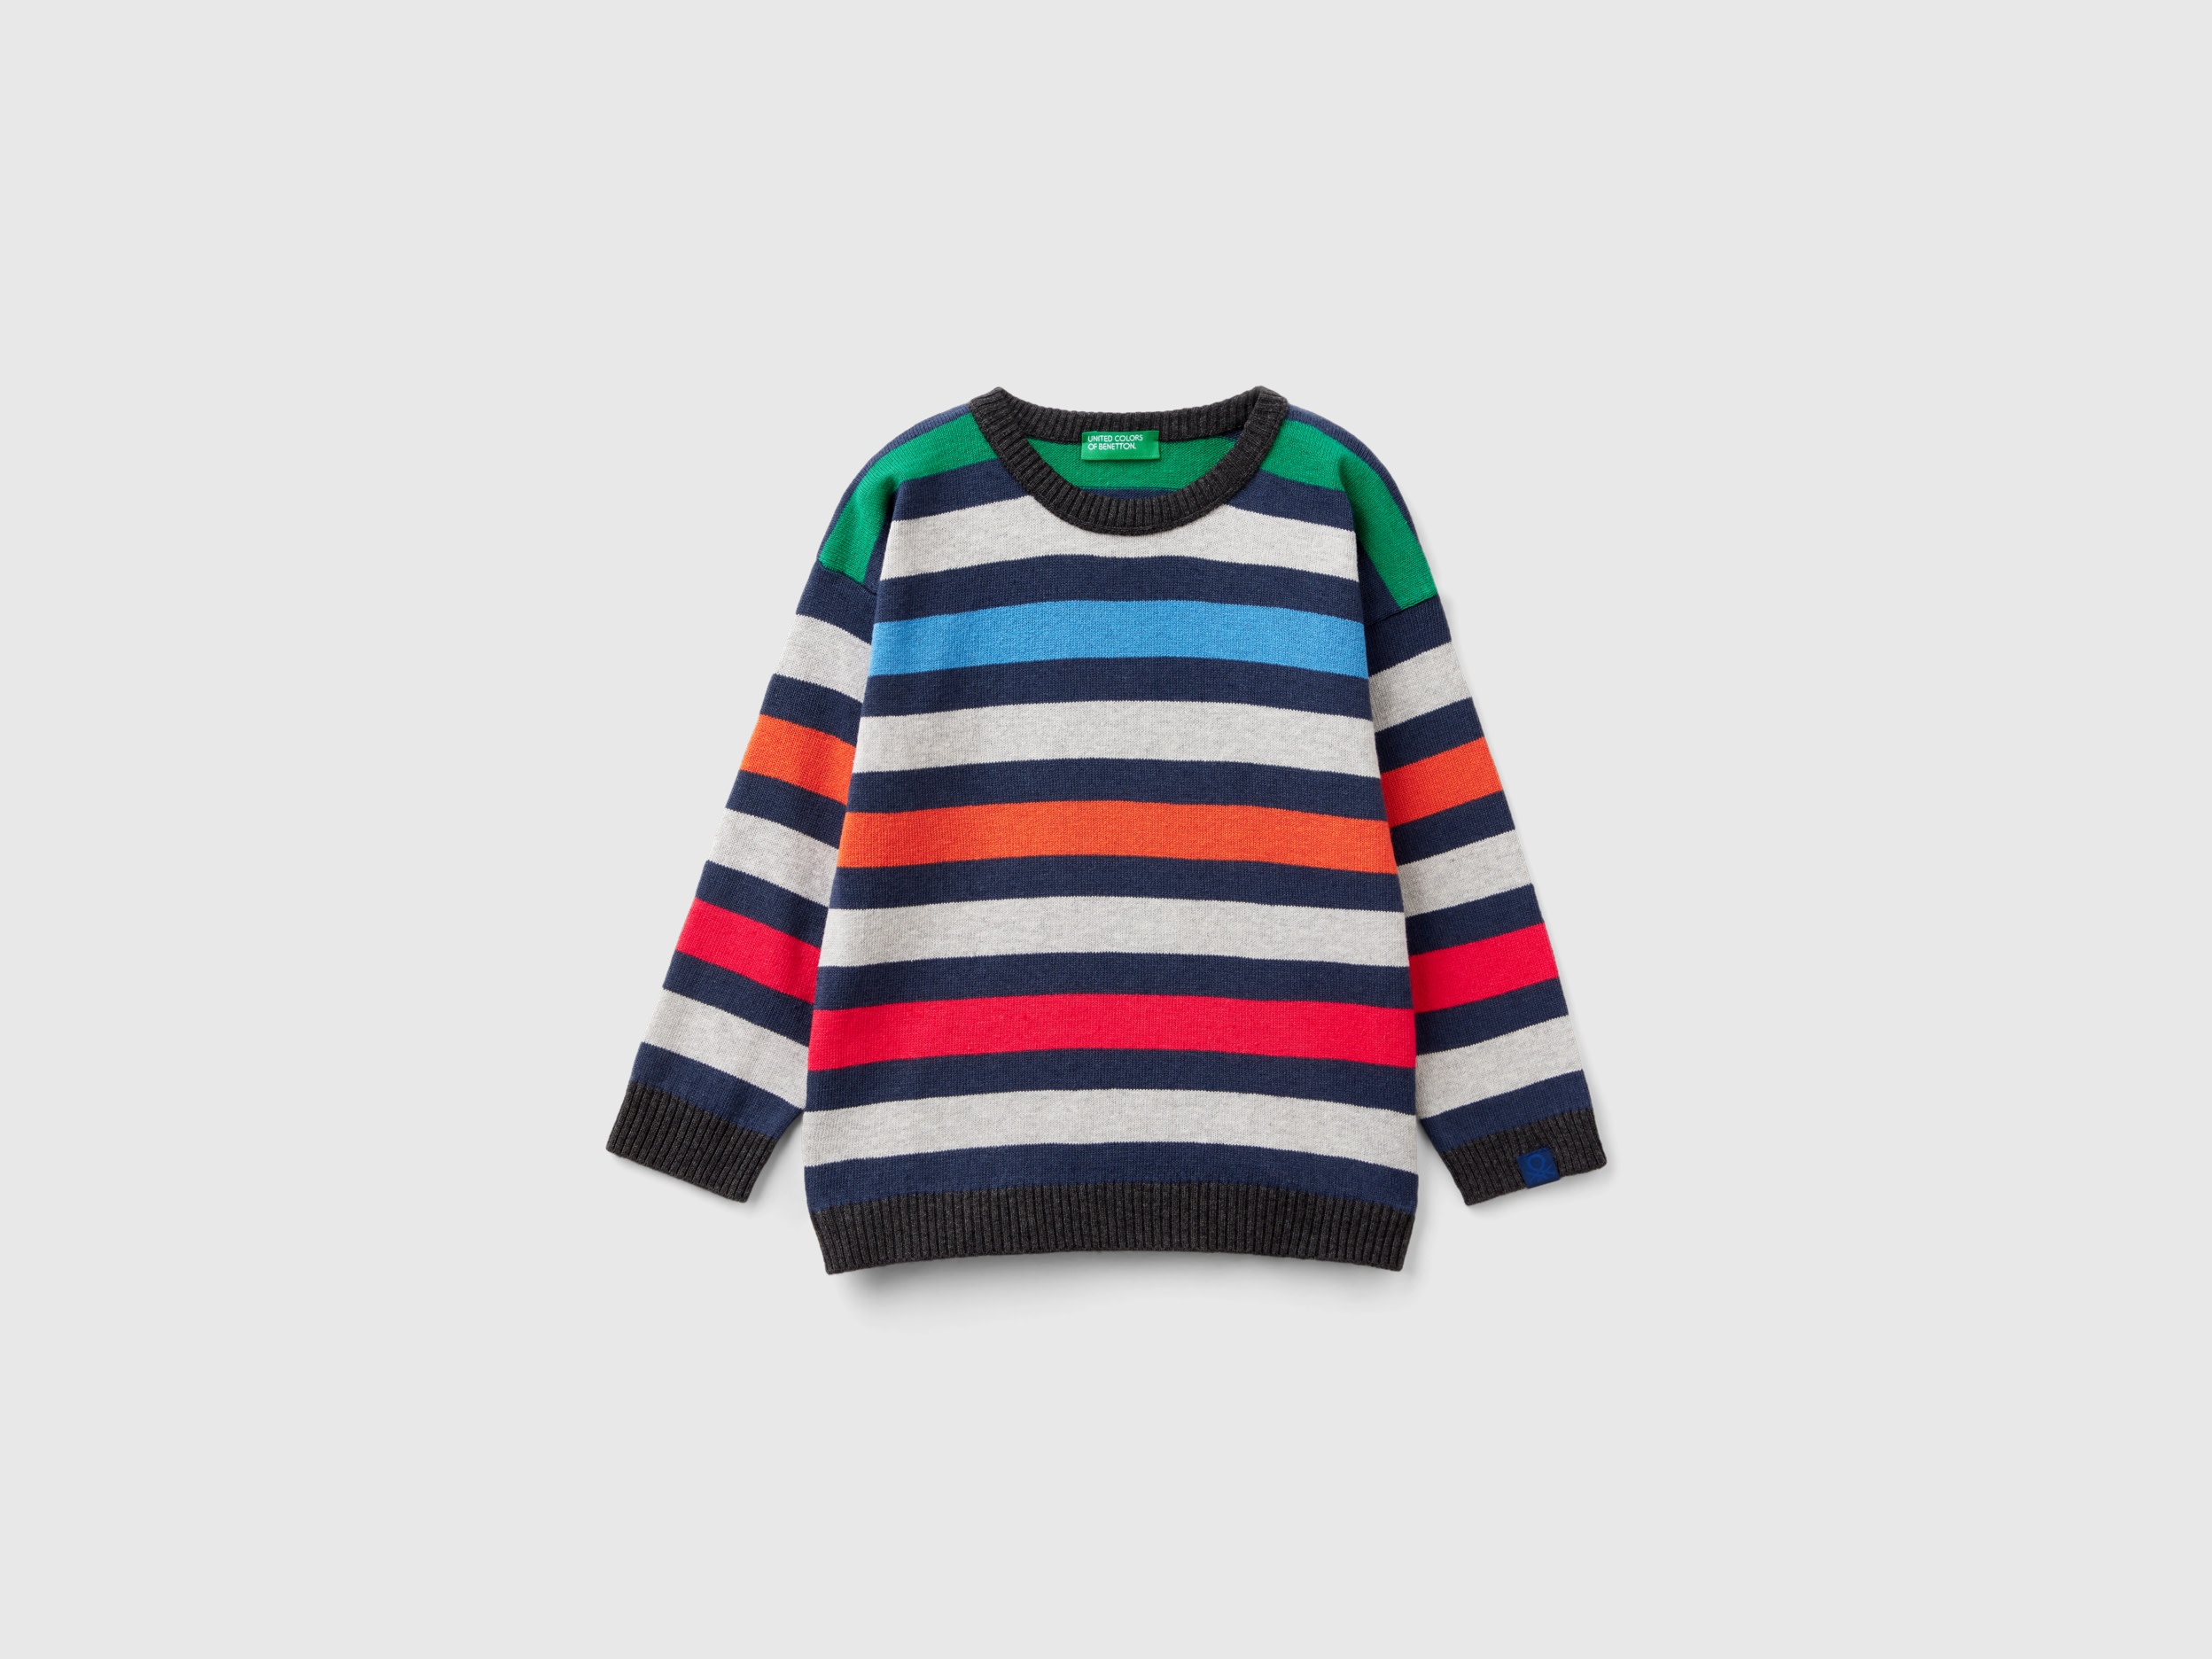 Image of Benetton, Striped Sweater, size 116, Multi-color, Kids